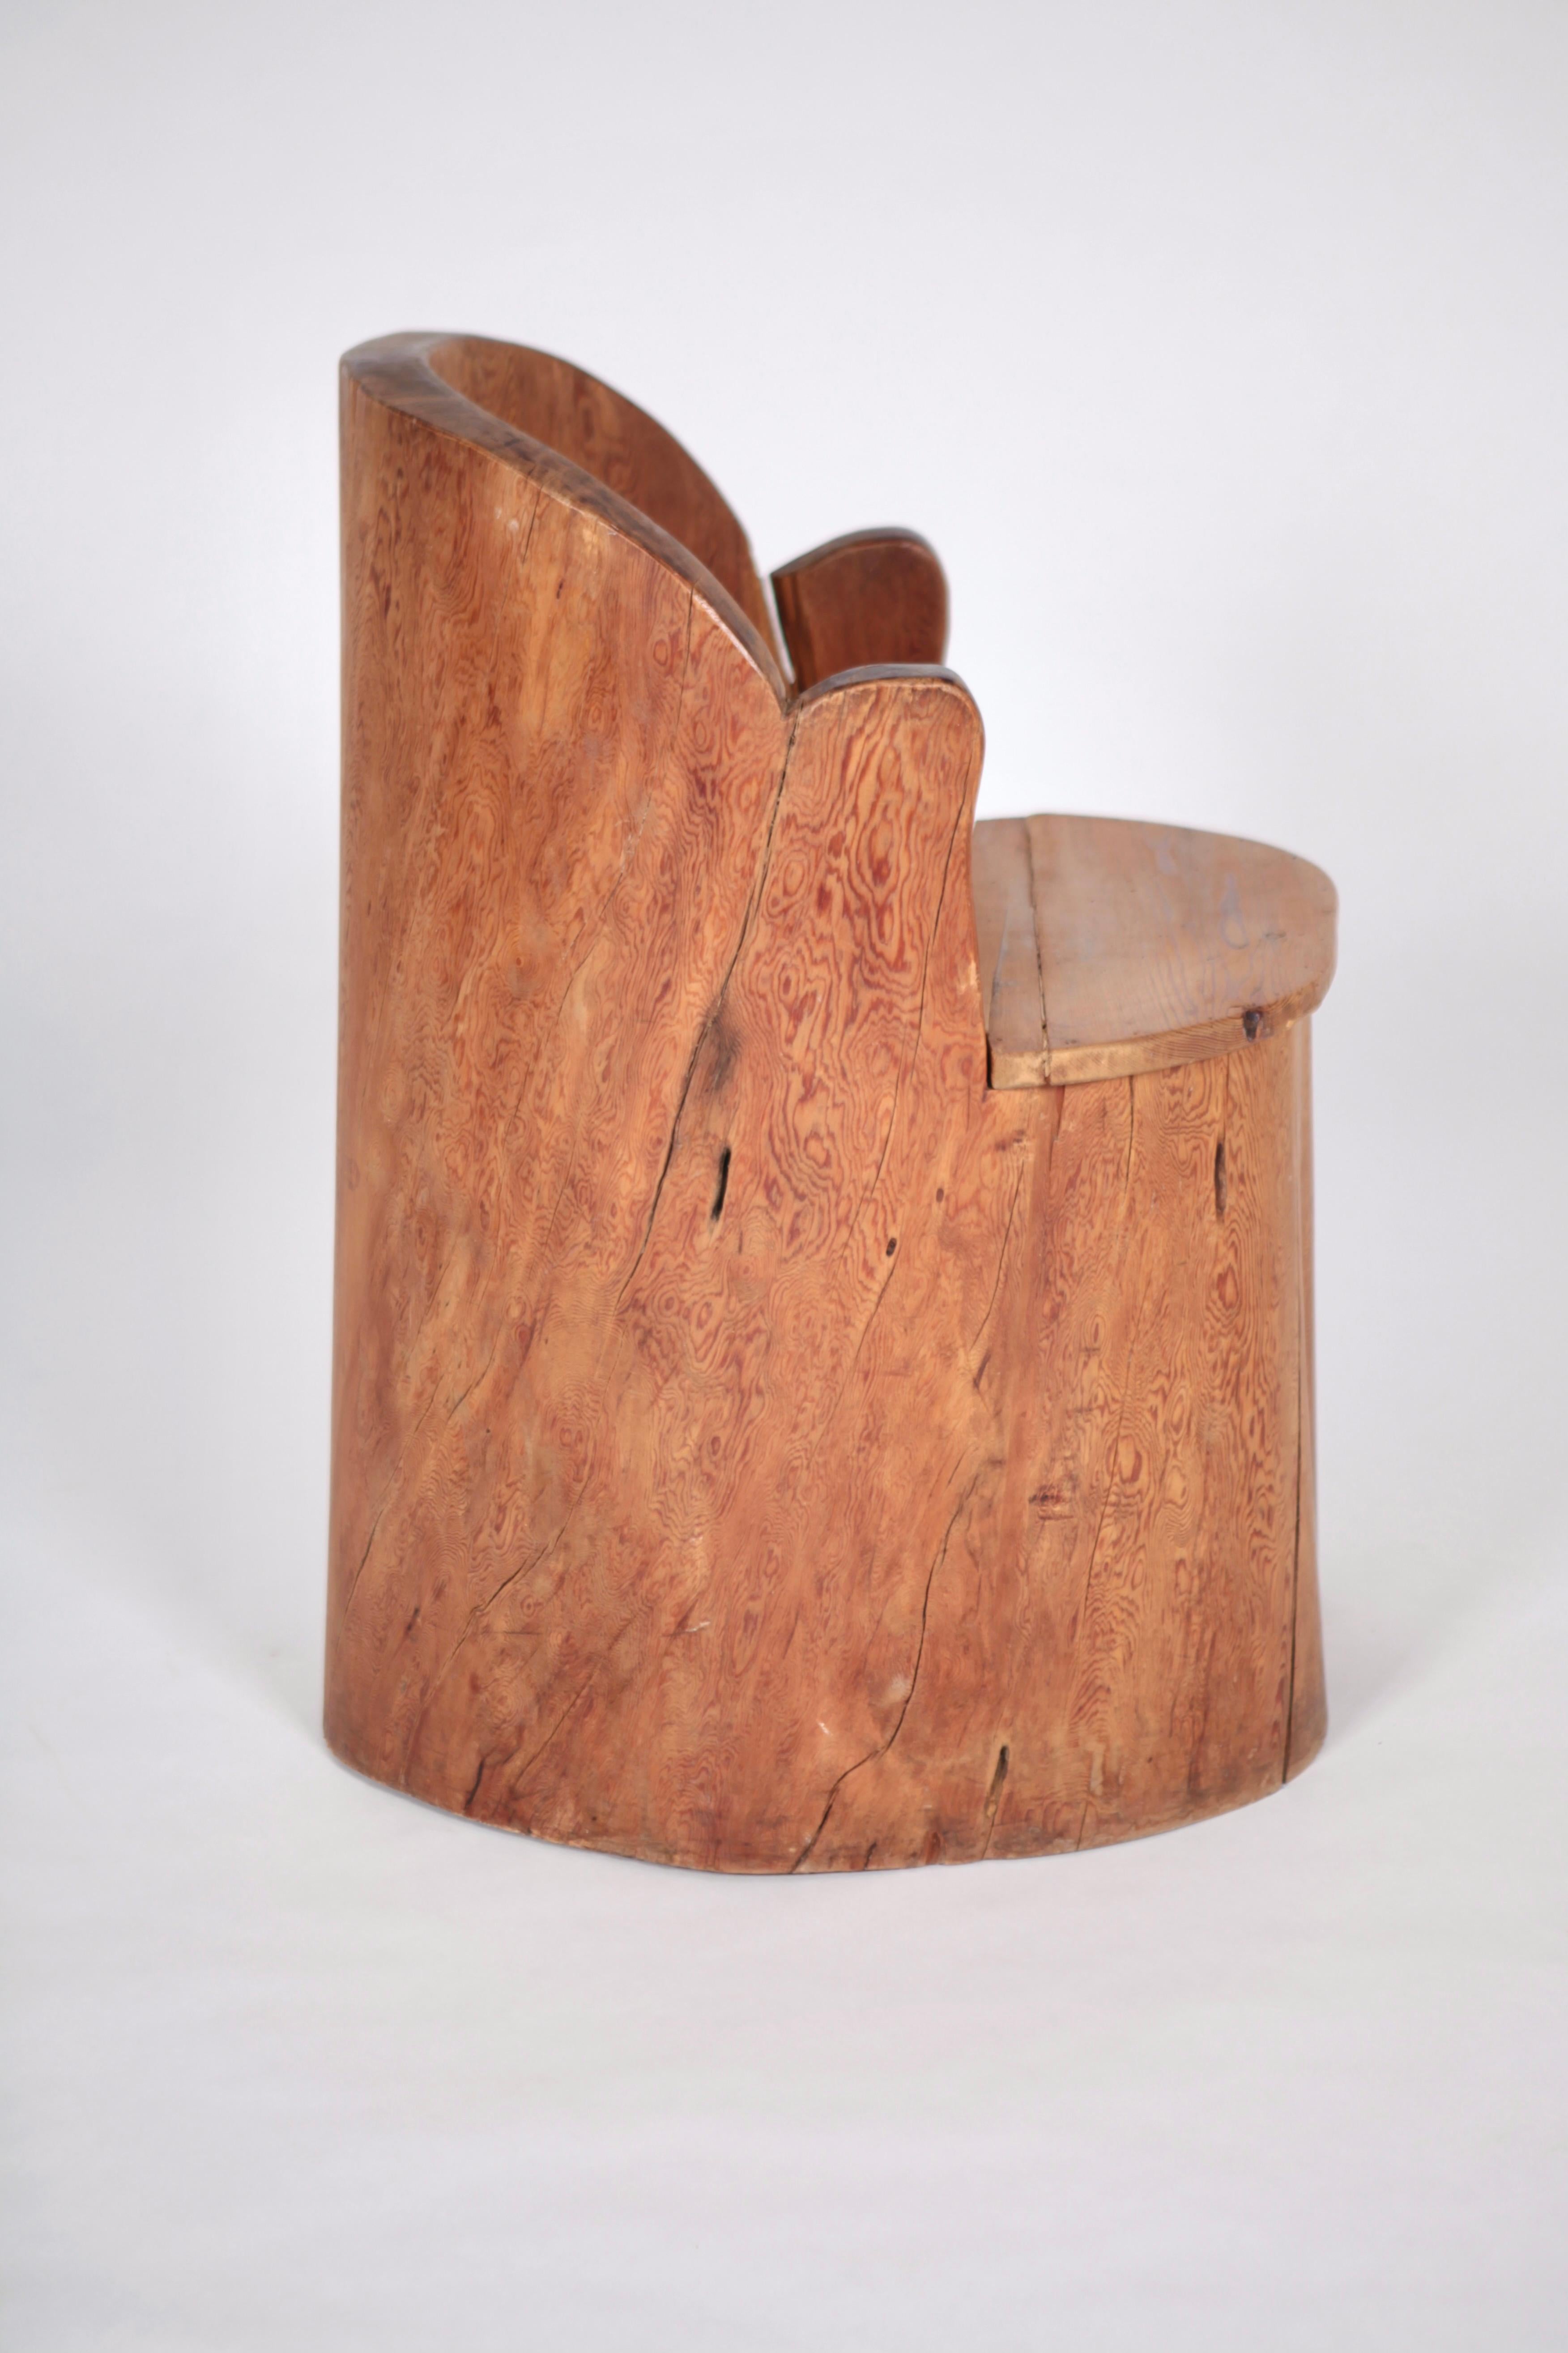 Mid-20th Century Stump Chair in Pine, Mora, Sweden 1930s. For Sale